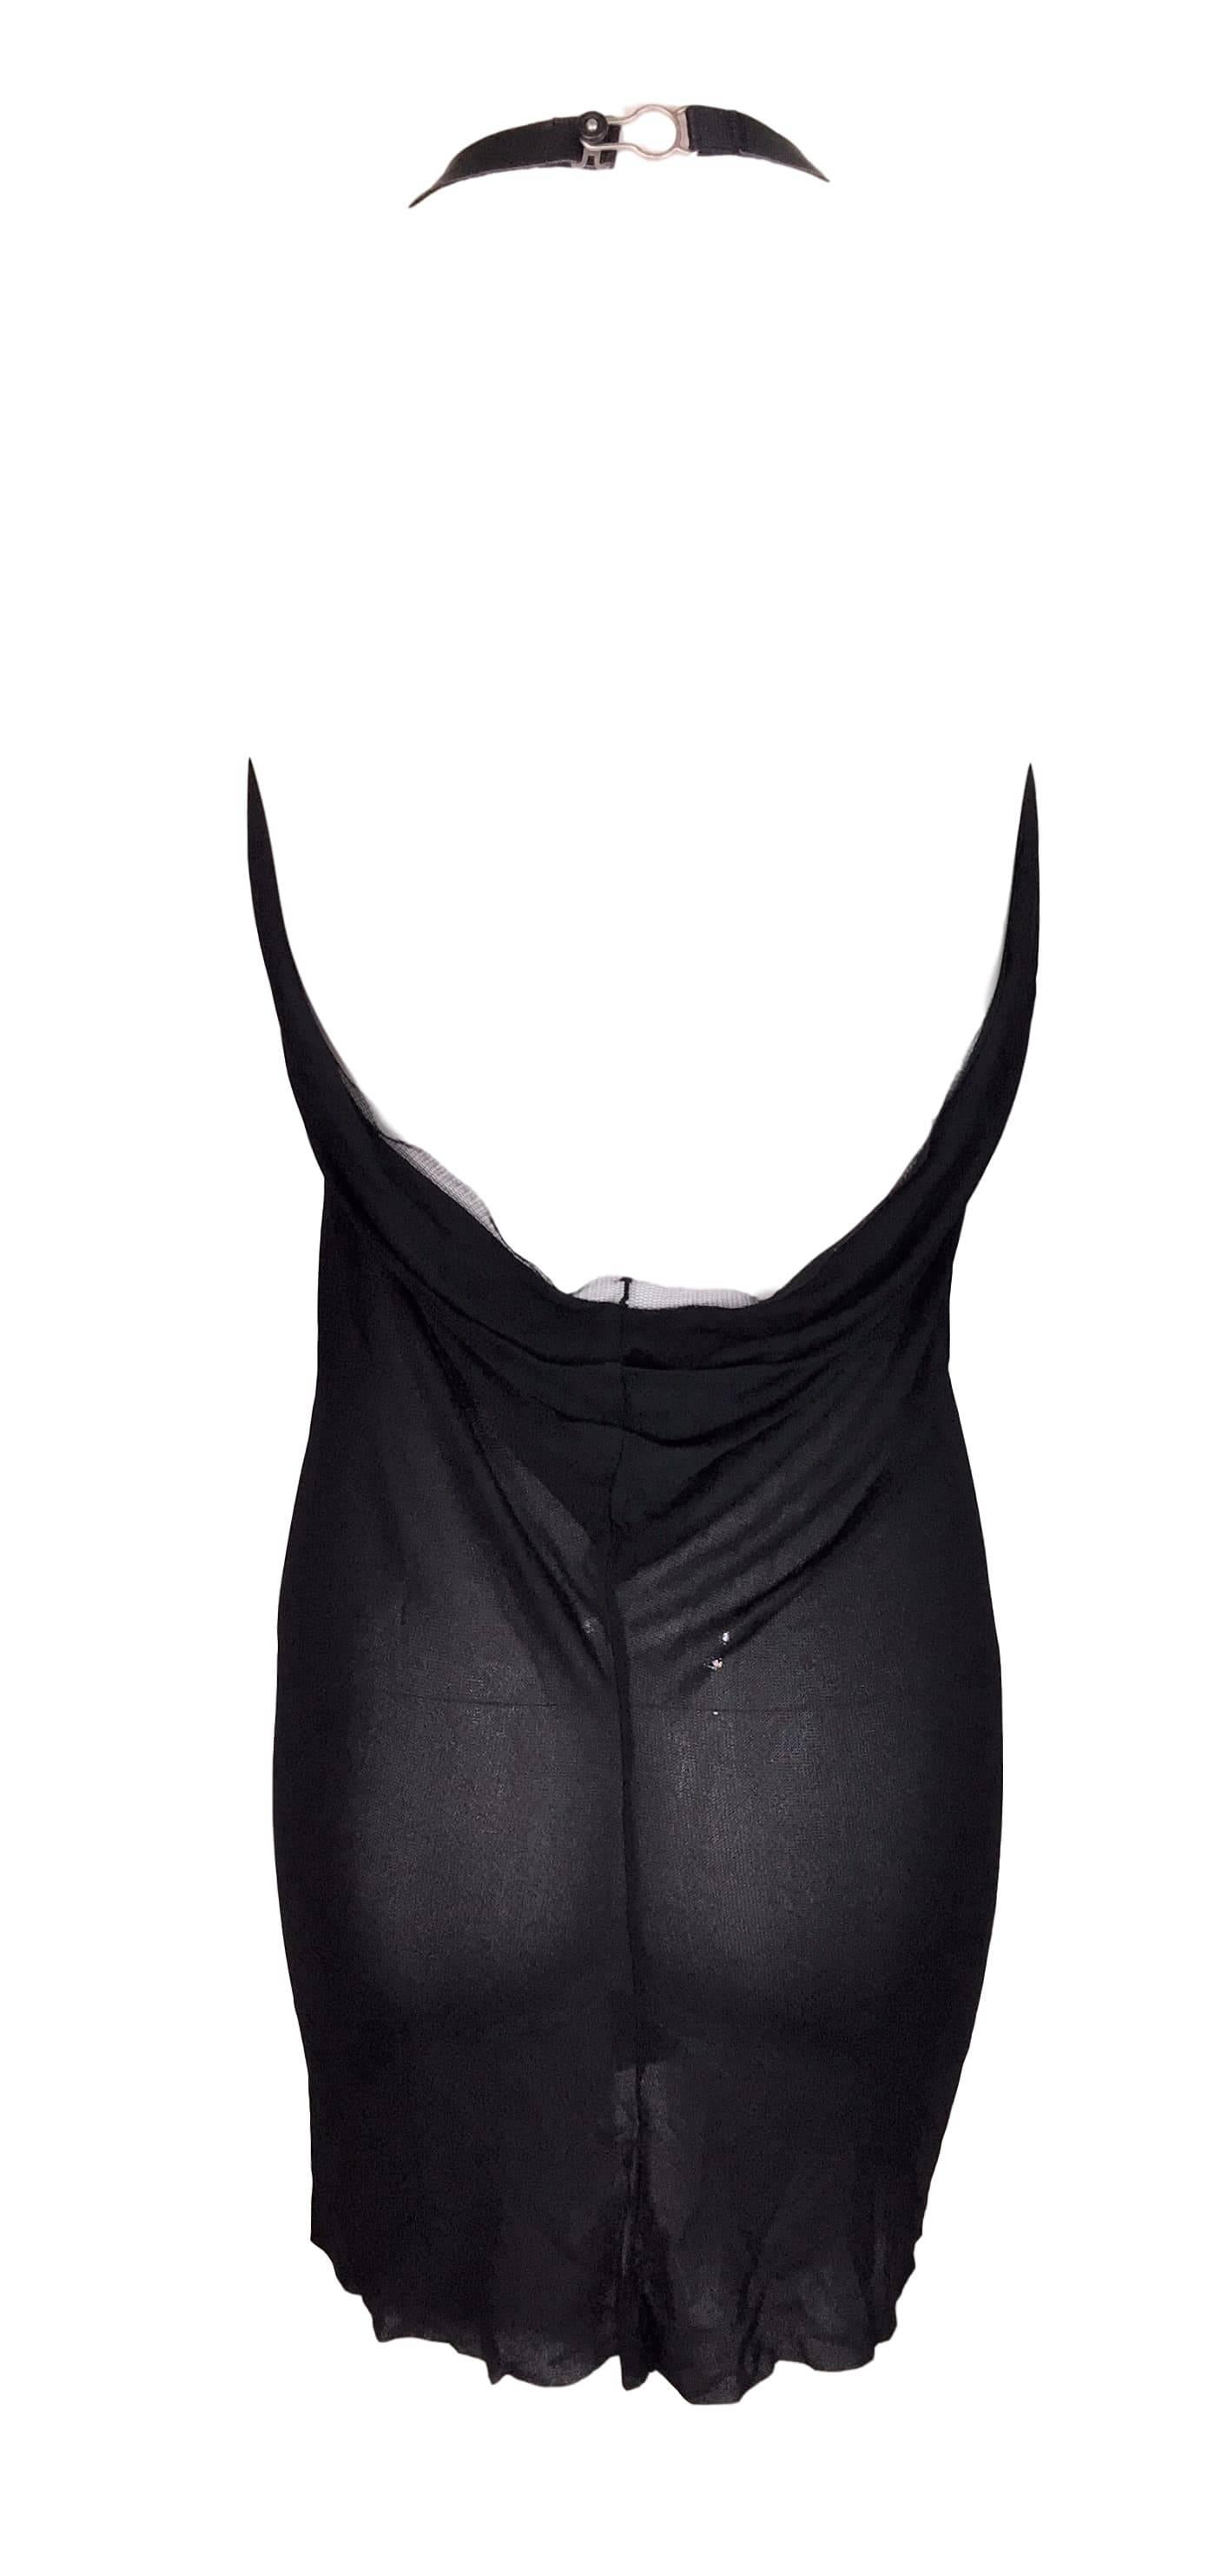 S/S 2010 Jean Paul Gaultier Sheer Black Plunging Applique Mini Dress In Excellent Condition In Yukon, OK